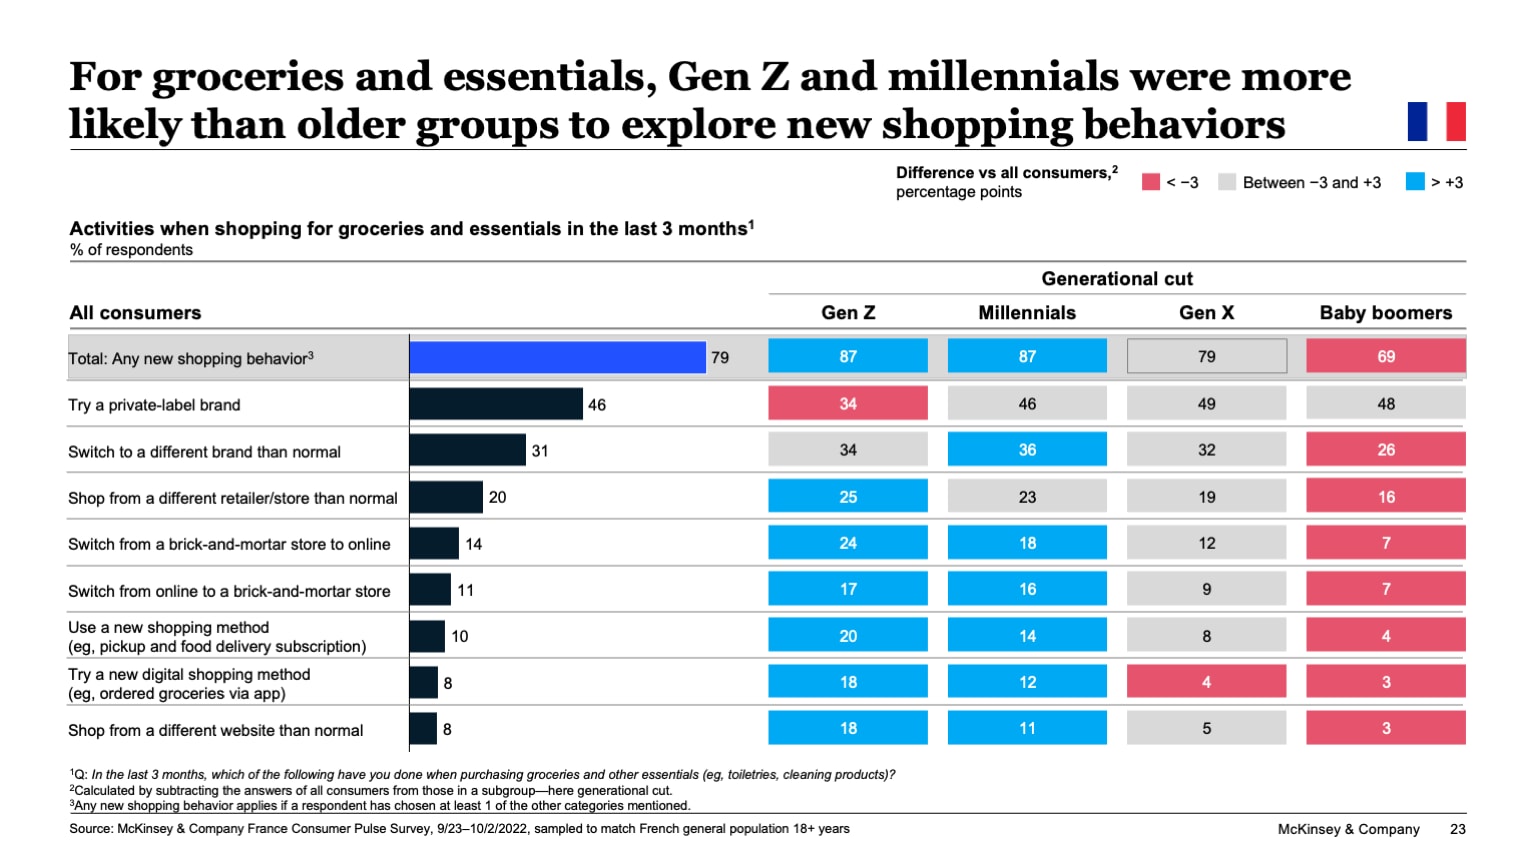 For groceries and essentials, Gen Z and millennials were more likely than older groups to explore new shopping behaviors 